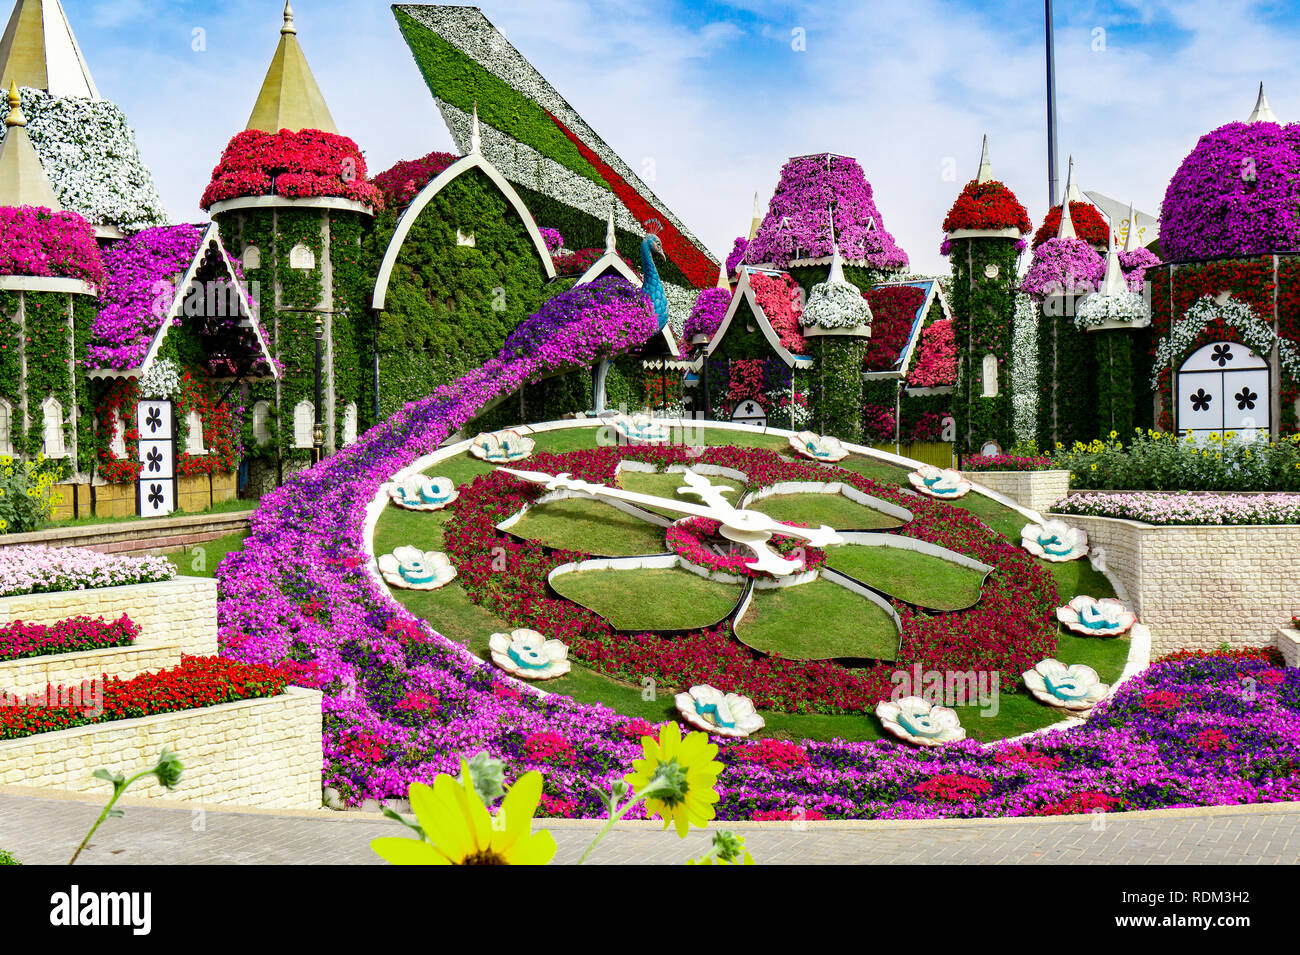 Dubai,UAE 11. 06. 2018 : bright floral clock with little garden houses in the Miracle Garden in Dubai Stock Photo